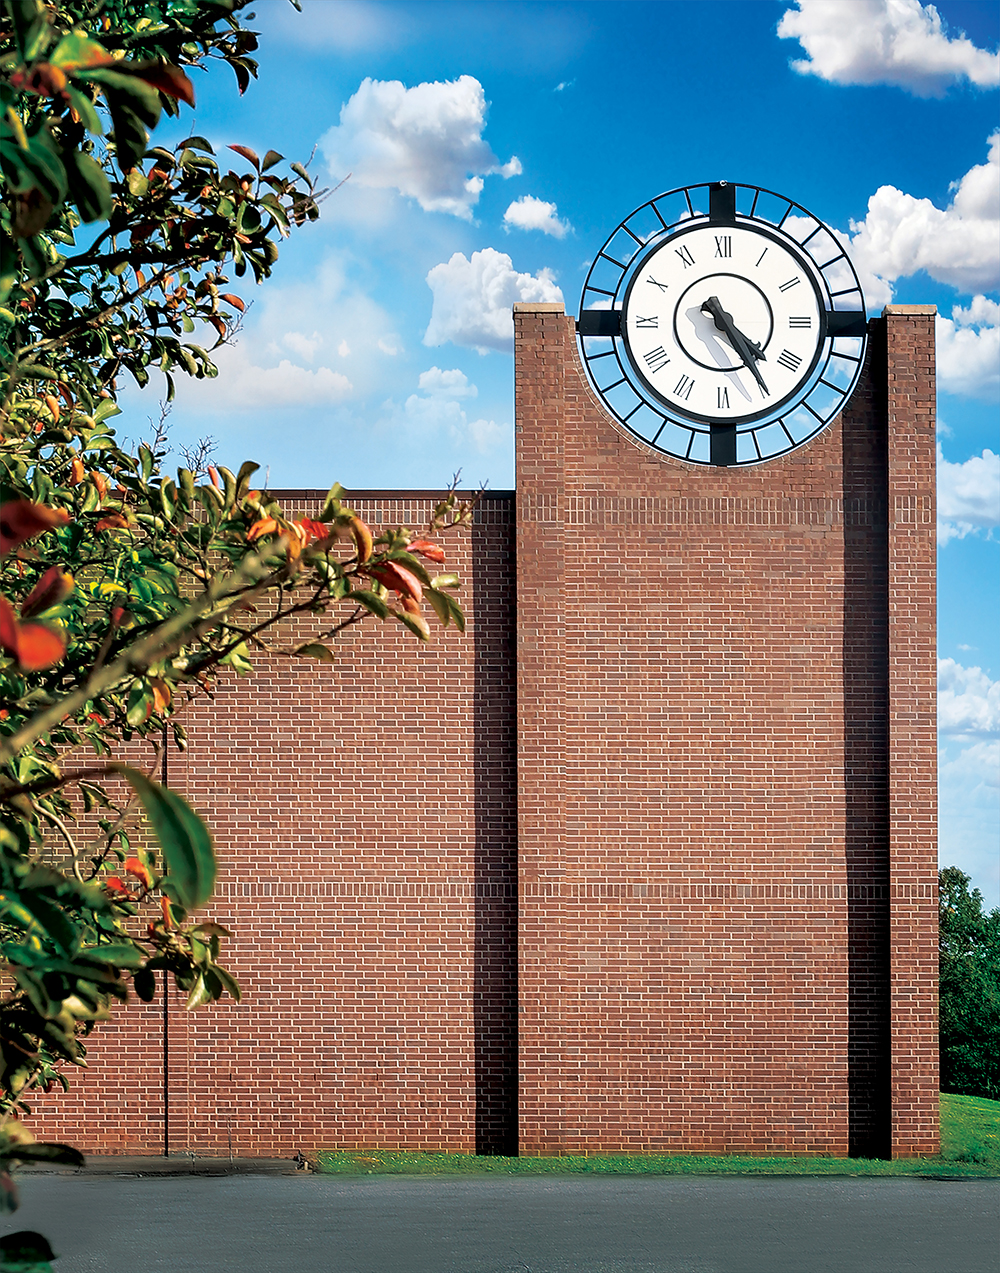 Clock tower in Mauldin, SC which was moved from the original building in Rockford, IL